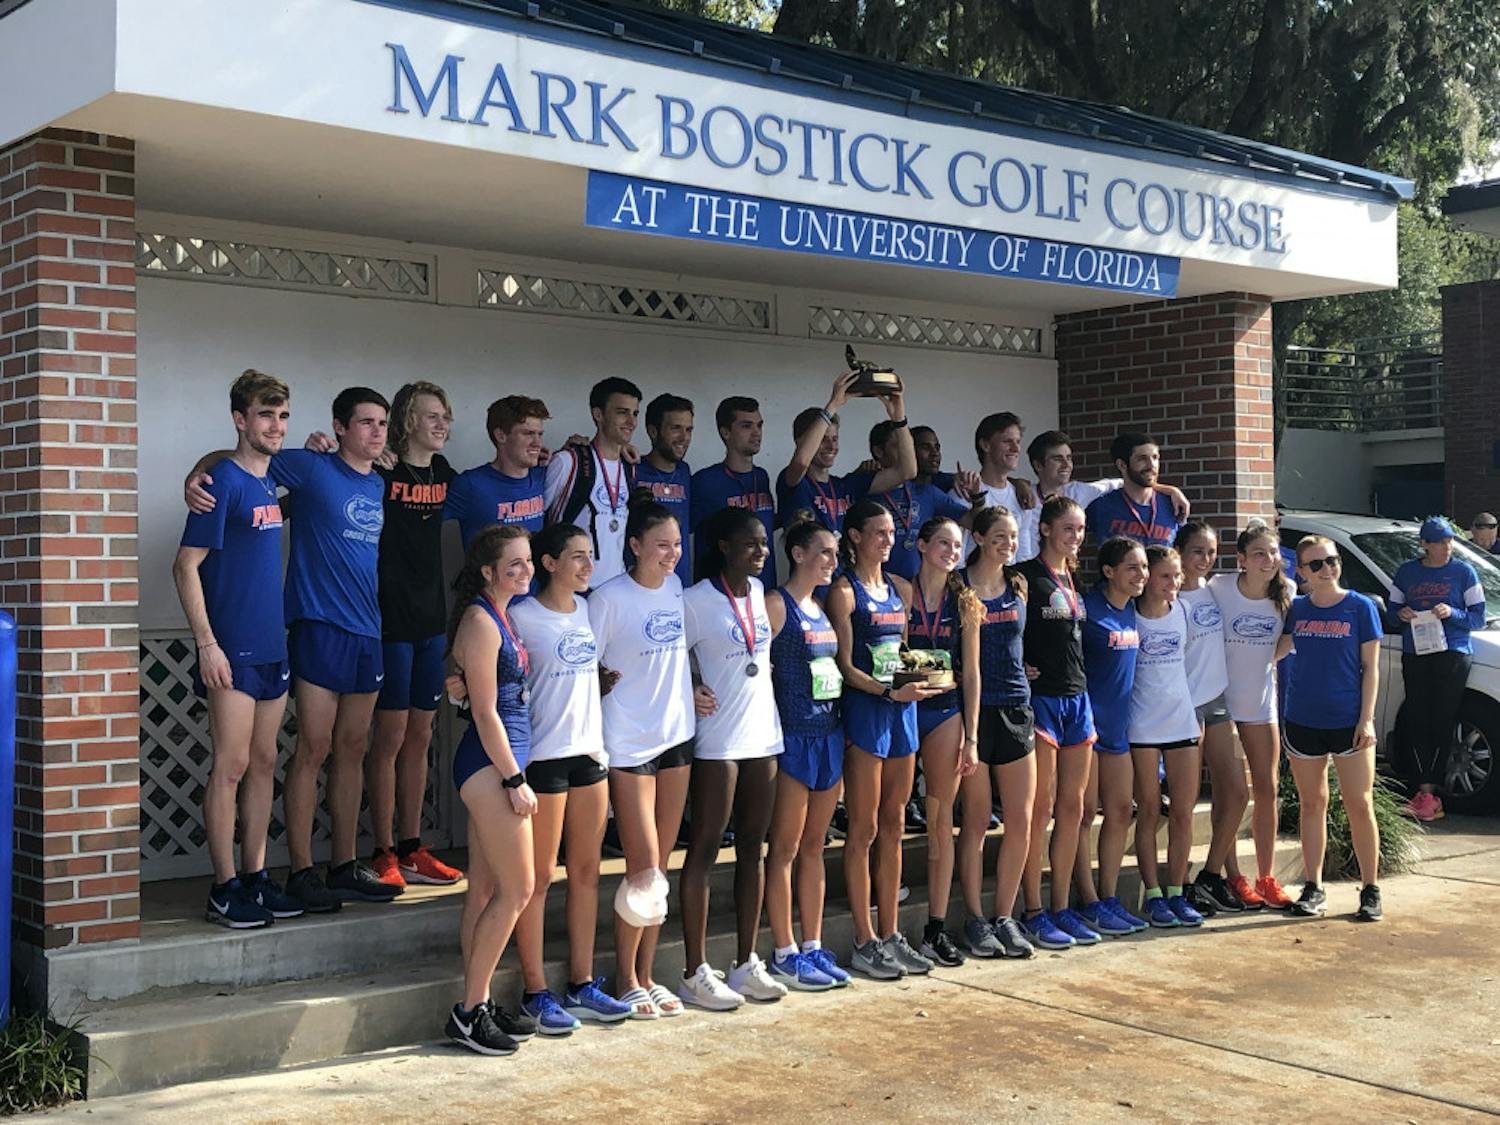 Both the men’s and women’s cross country teams took first place at their lone home meet of the season for the first time since 2016.